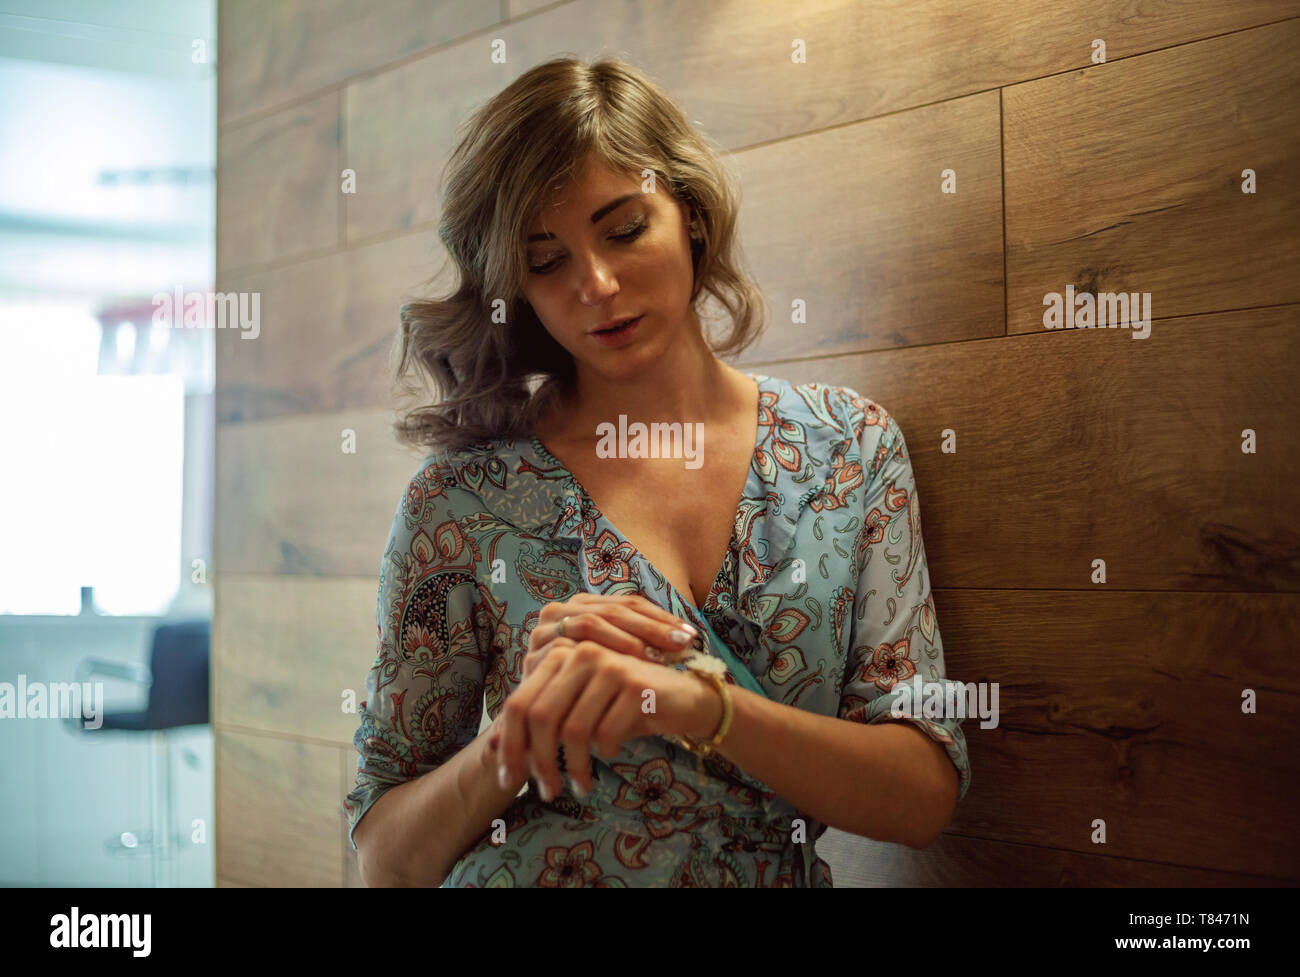 Woman checking time, leaning against wooden wall Stock Photo